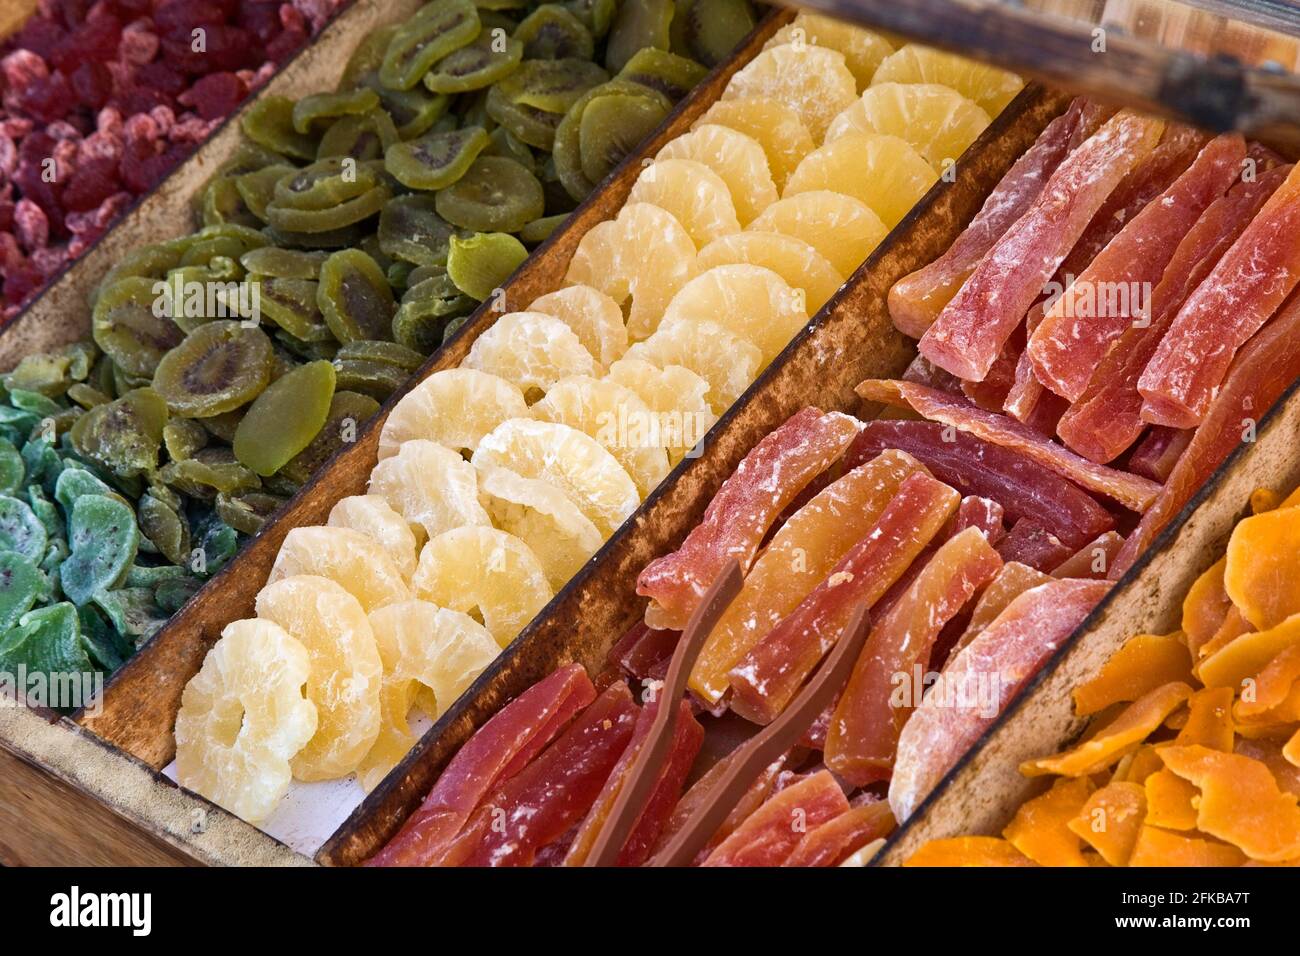 candy fruits at a market stand Stock Photo